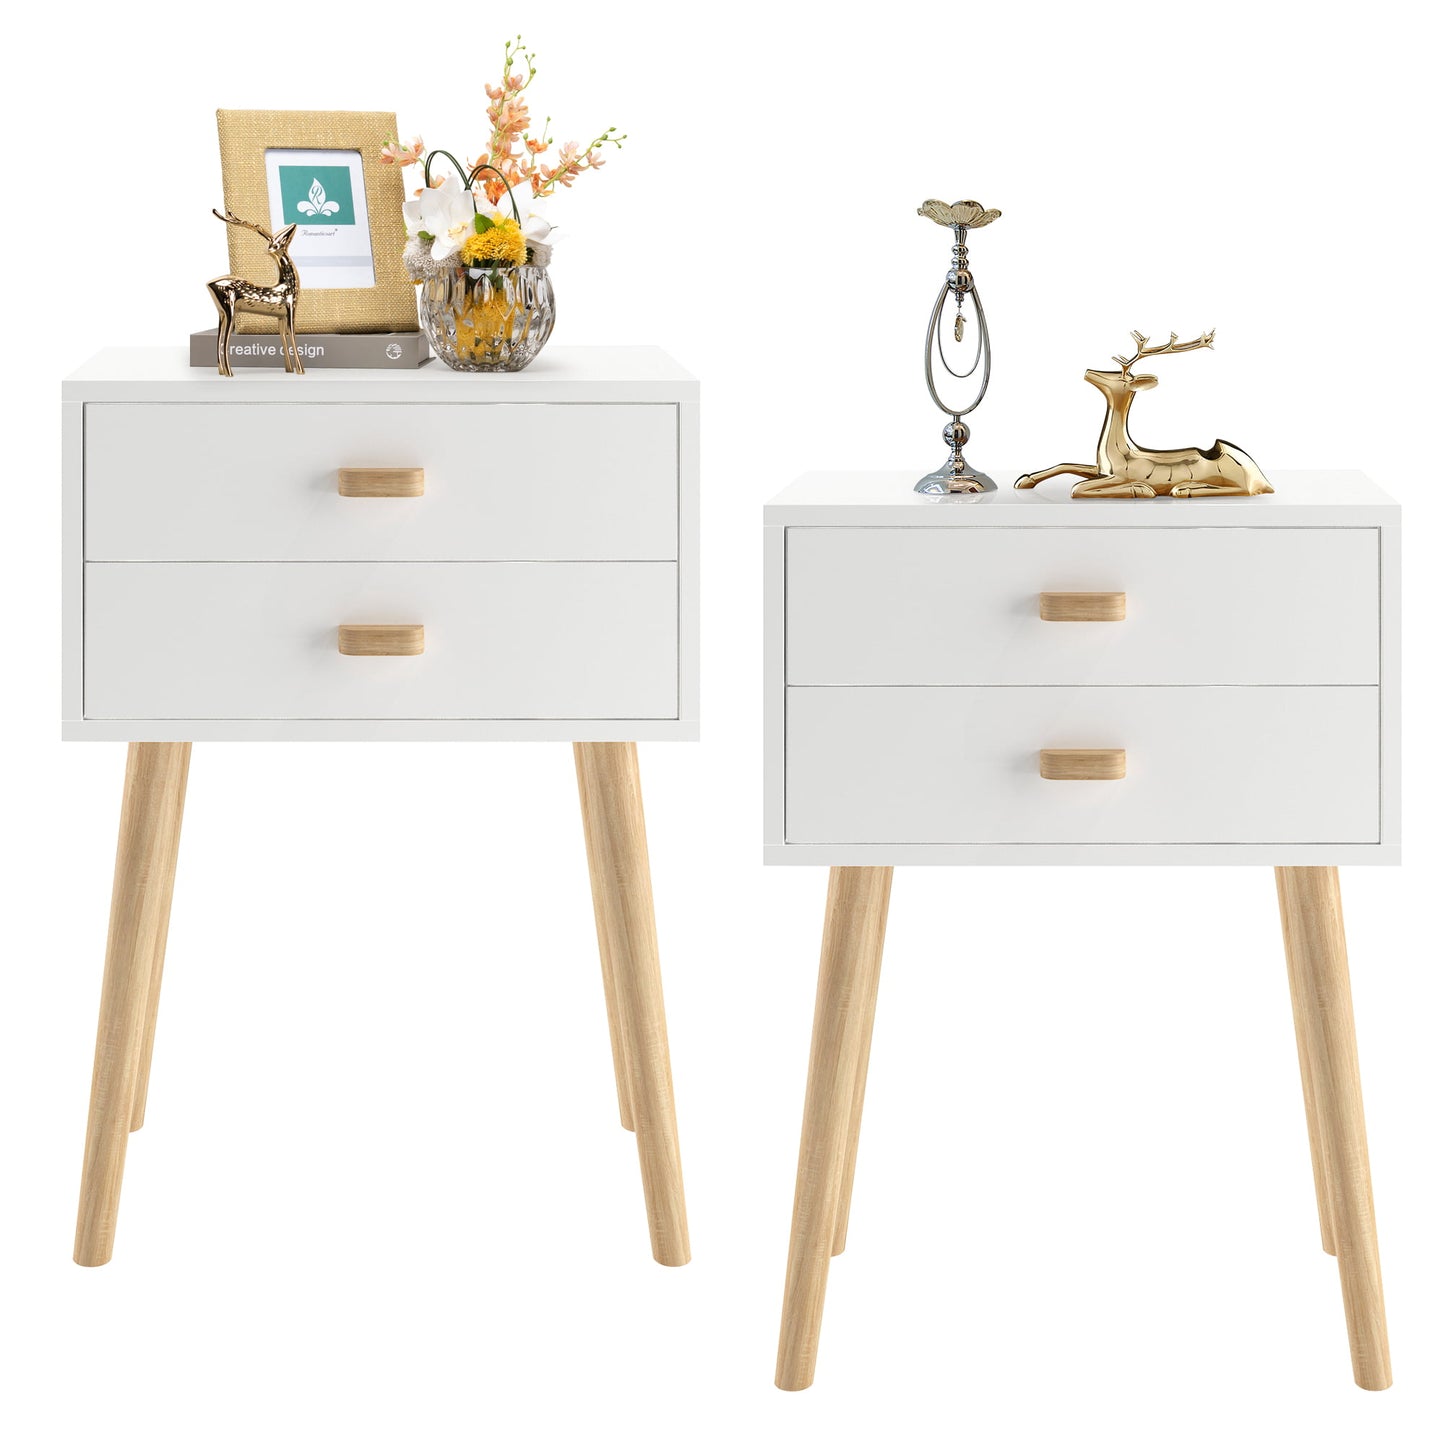 SYNGAR End Table Set of 2, Night Stand Bed Side Table with Drawers, LSE Bedside Table for Bedroom, White, LJ161